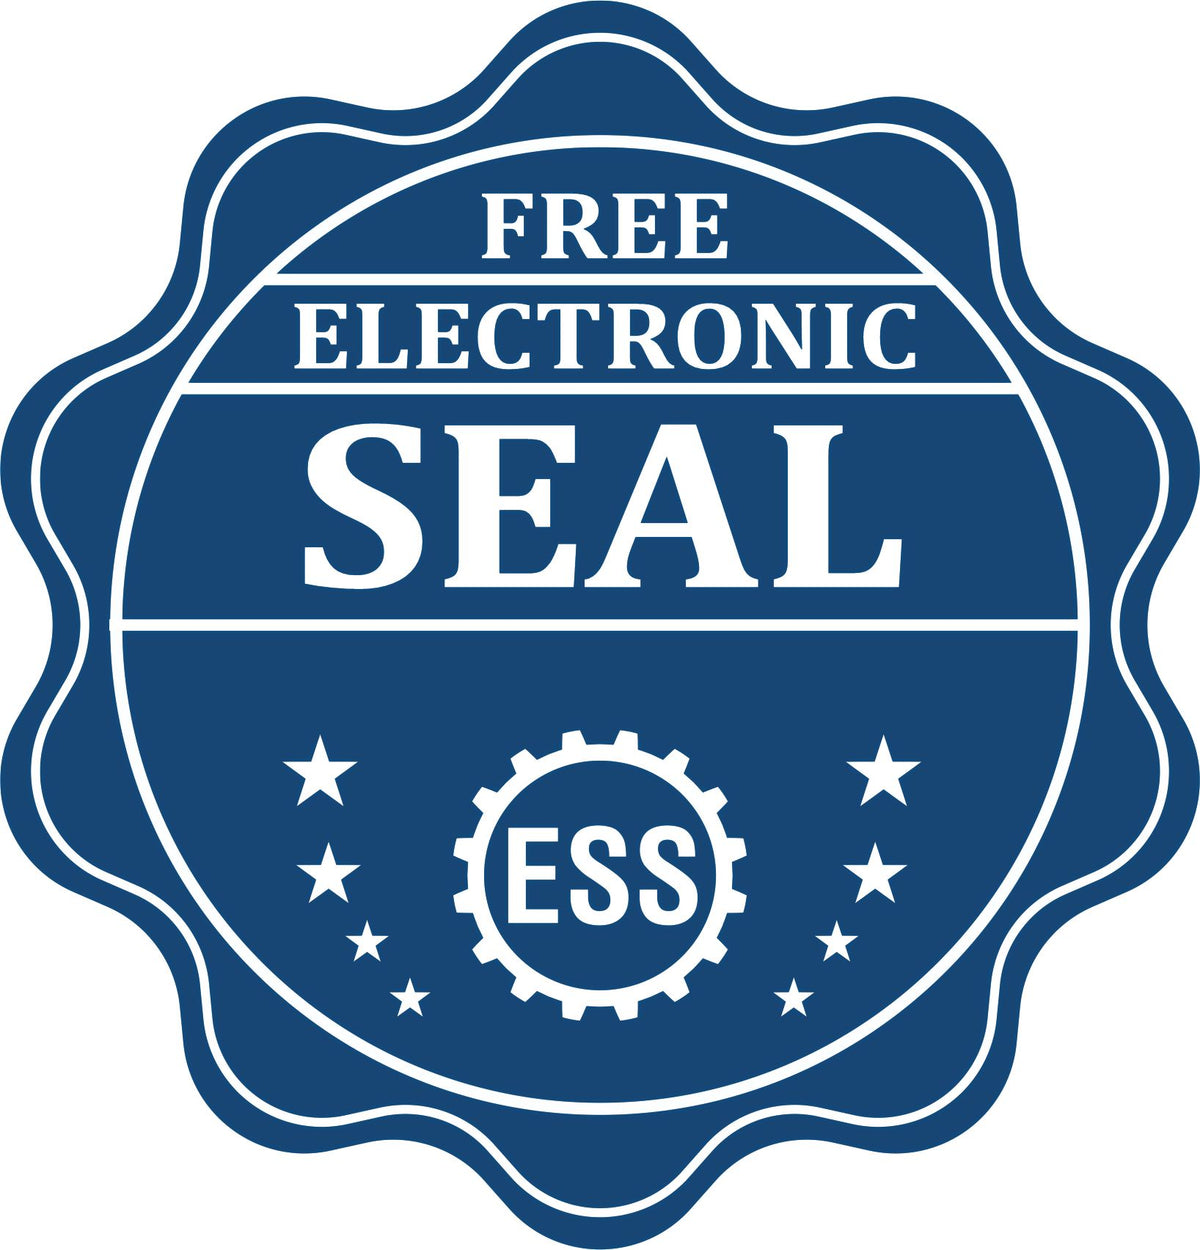 A badge showing a free electronic seal for the Long Reach Minnesota PE Seal with stars and the ESS gear on the emblem.